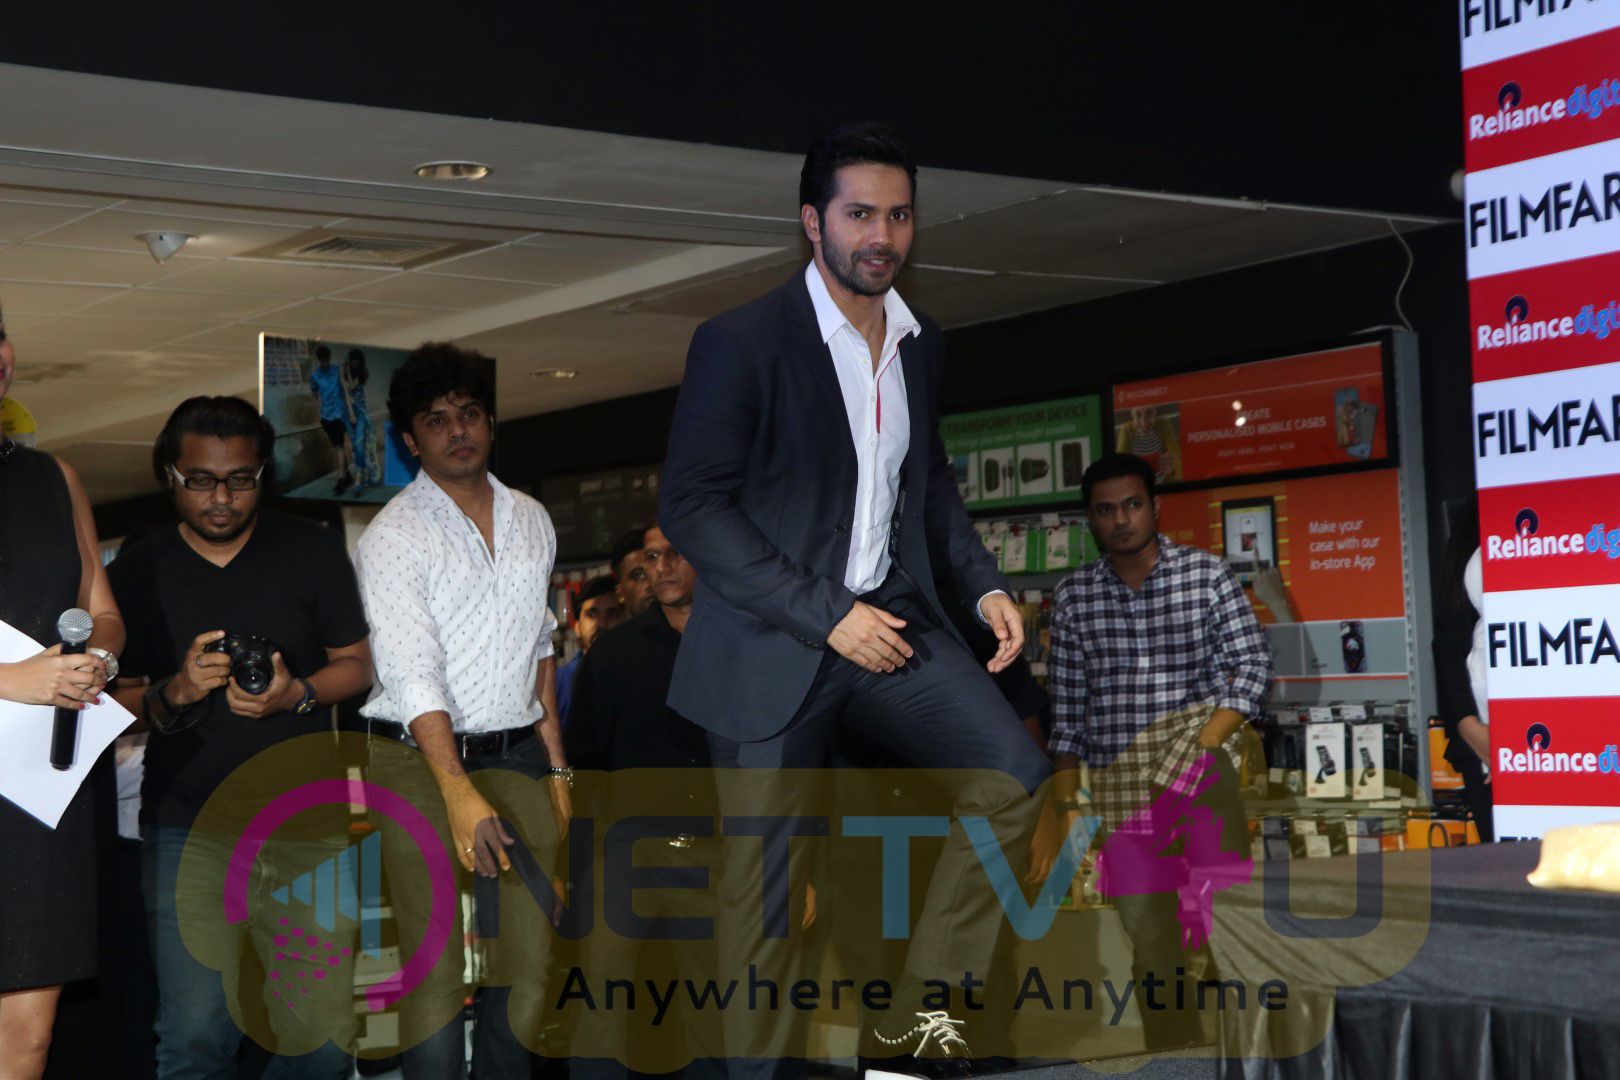 Bollywood Actor Varun Dhawan Launches Filmfare August 2016 Cover Issue Photos Hindi Gallery